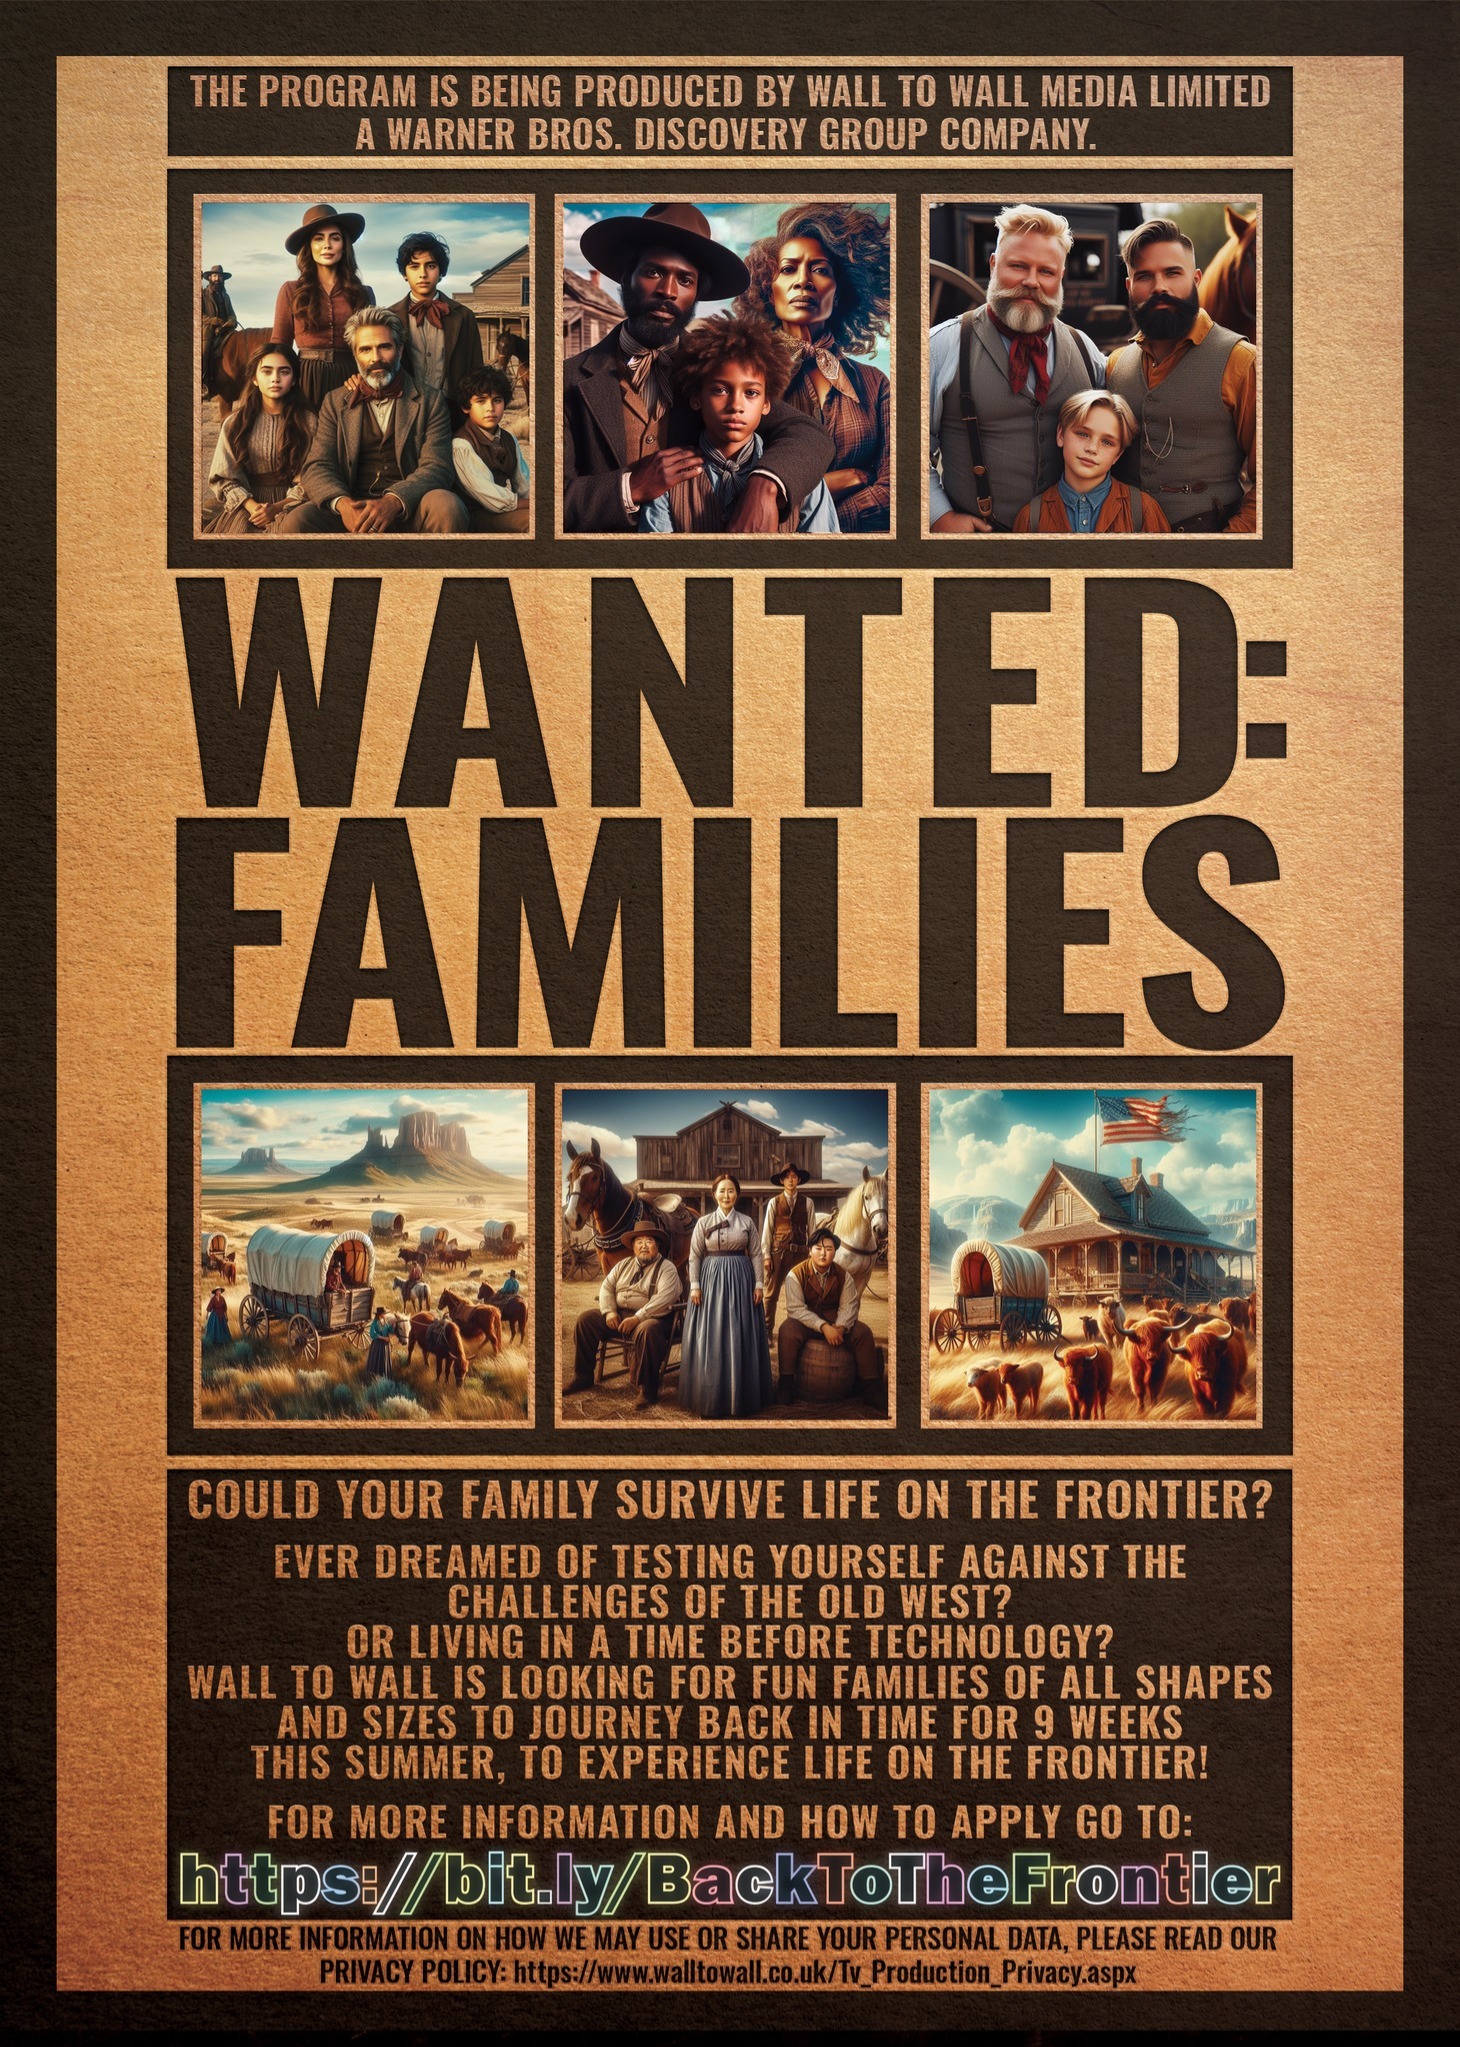 COULD YOUR FAMILY SURVIVE LIFE ON THE FRONTIER?